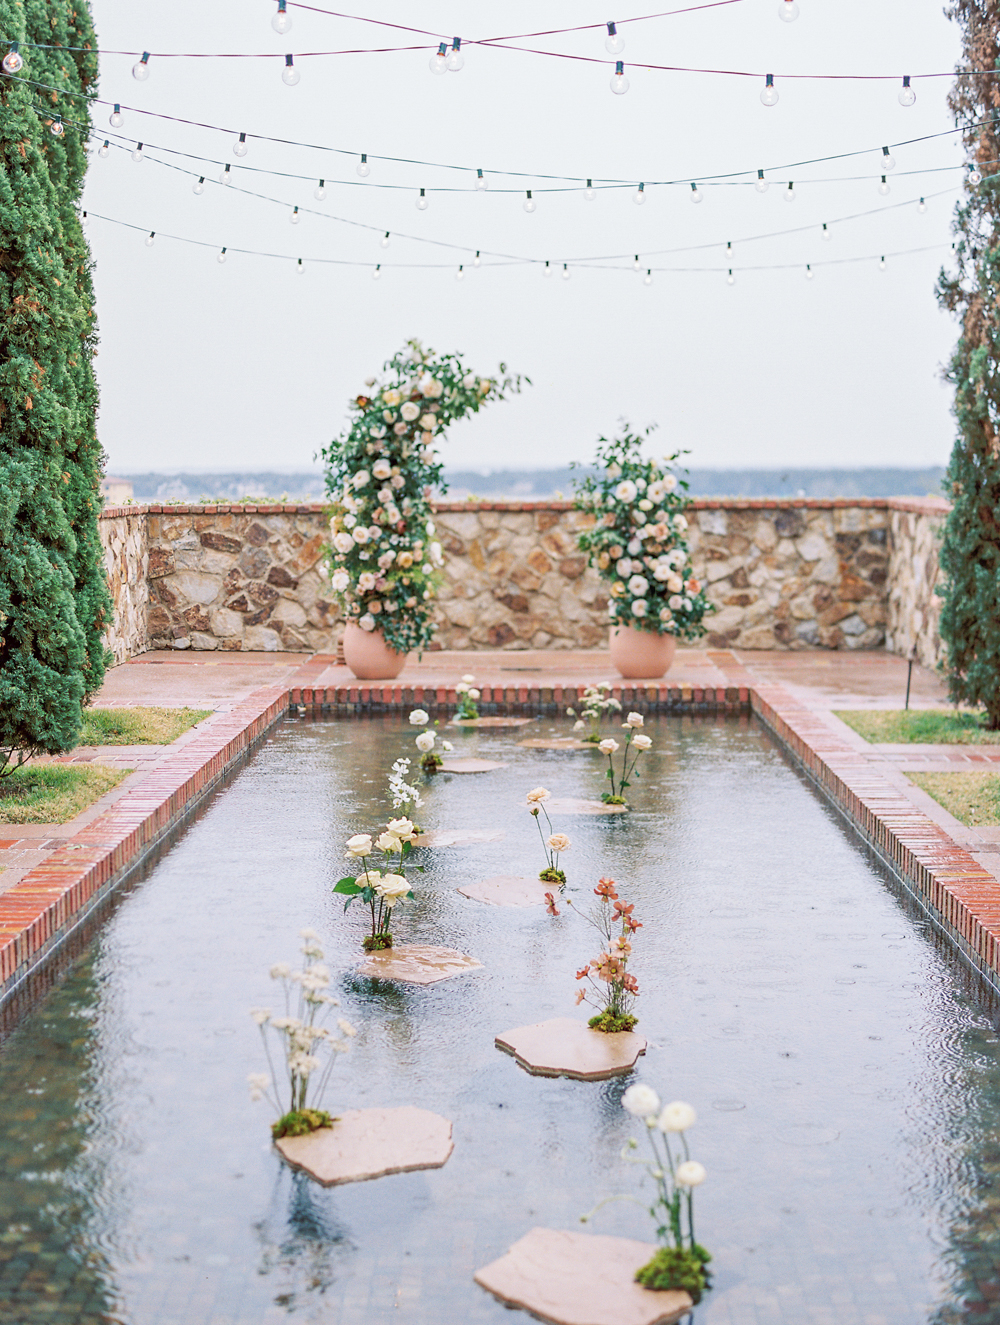 luxurious floral wedding arch in front of reflecting pool on rainy day